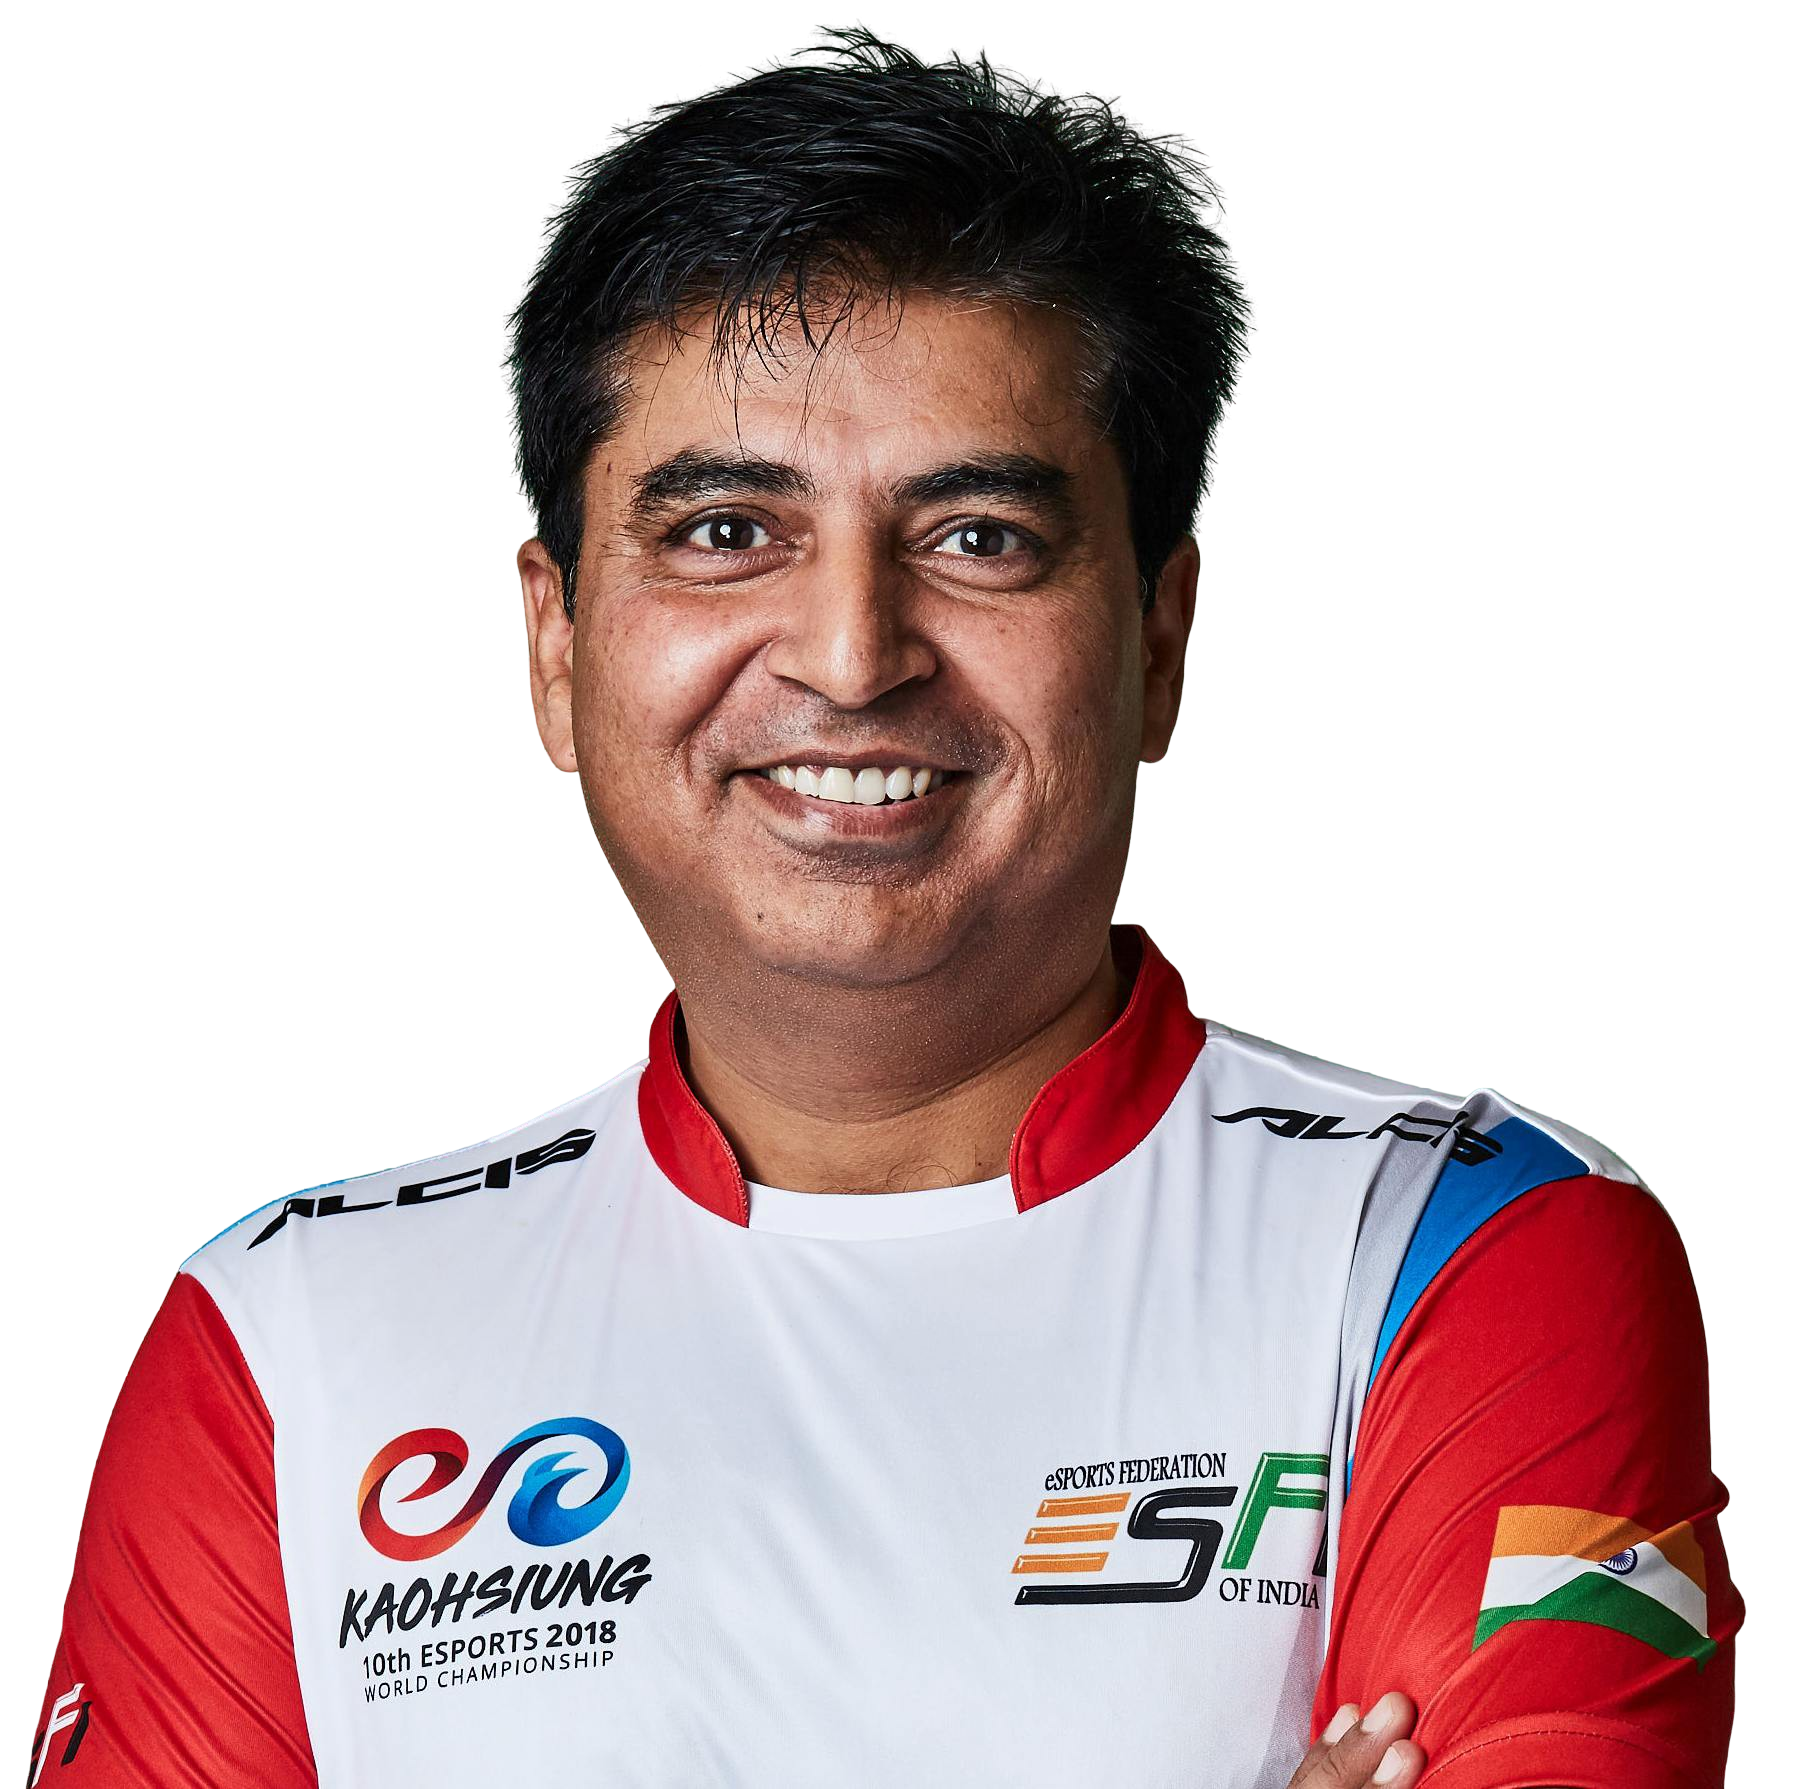 Lokesh Suji, <span>Director, Esports Federation of India & Vice President of the Asian Esports Federation (AESF)</span>